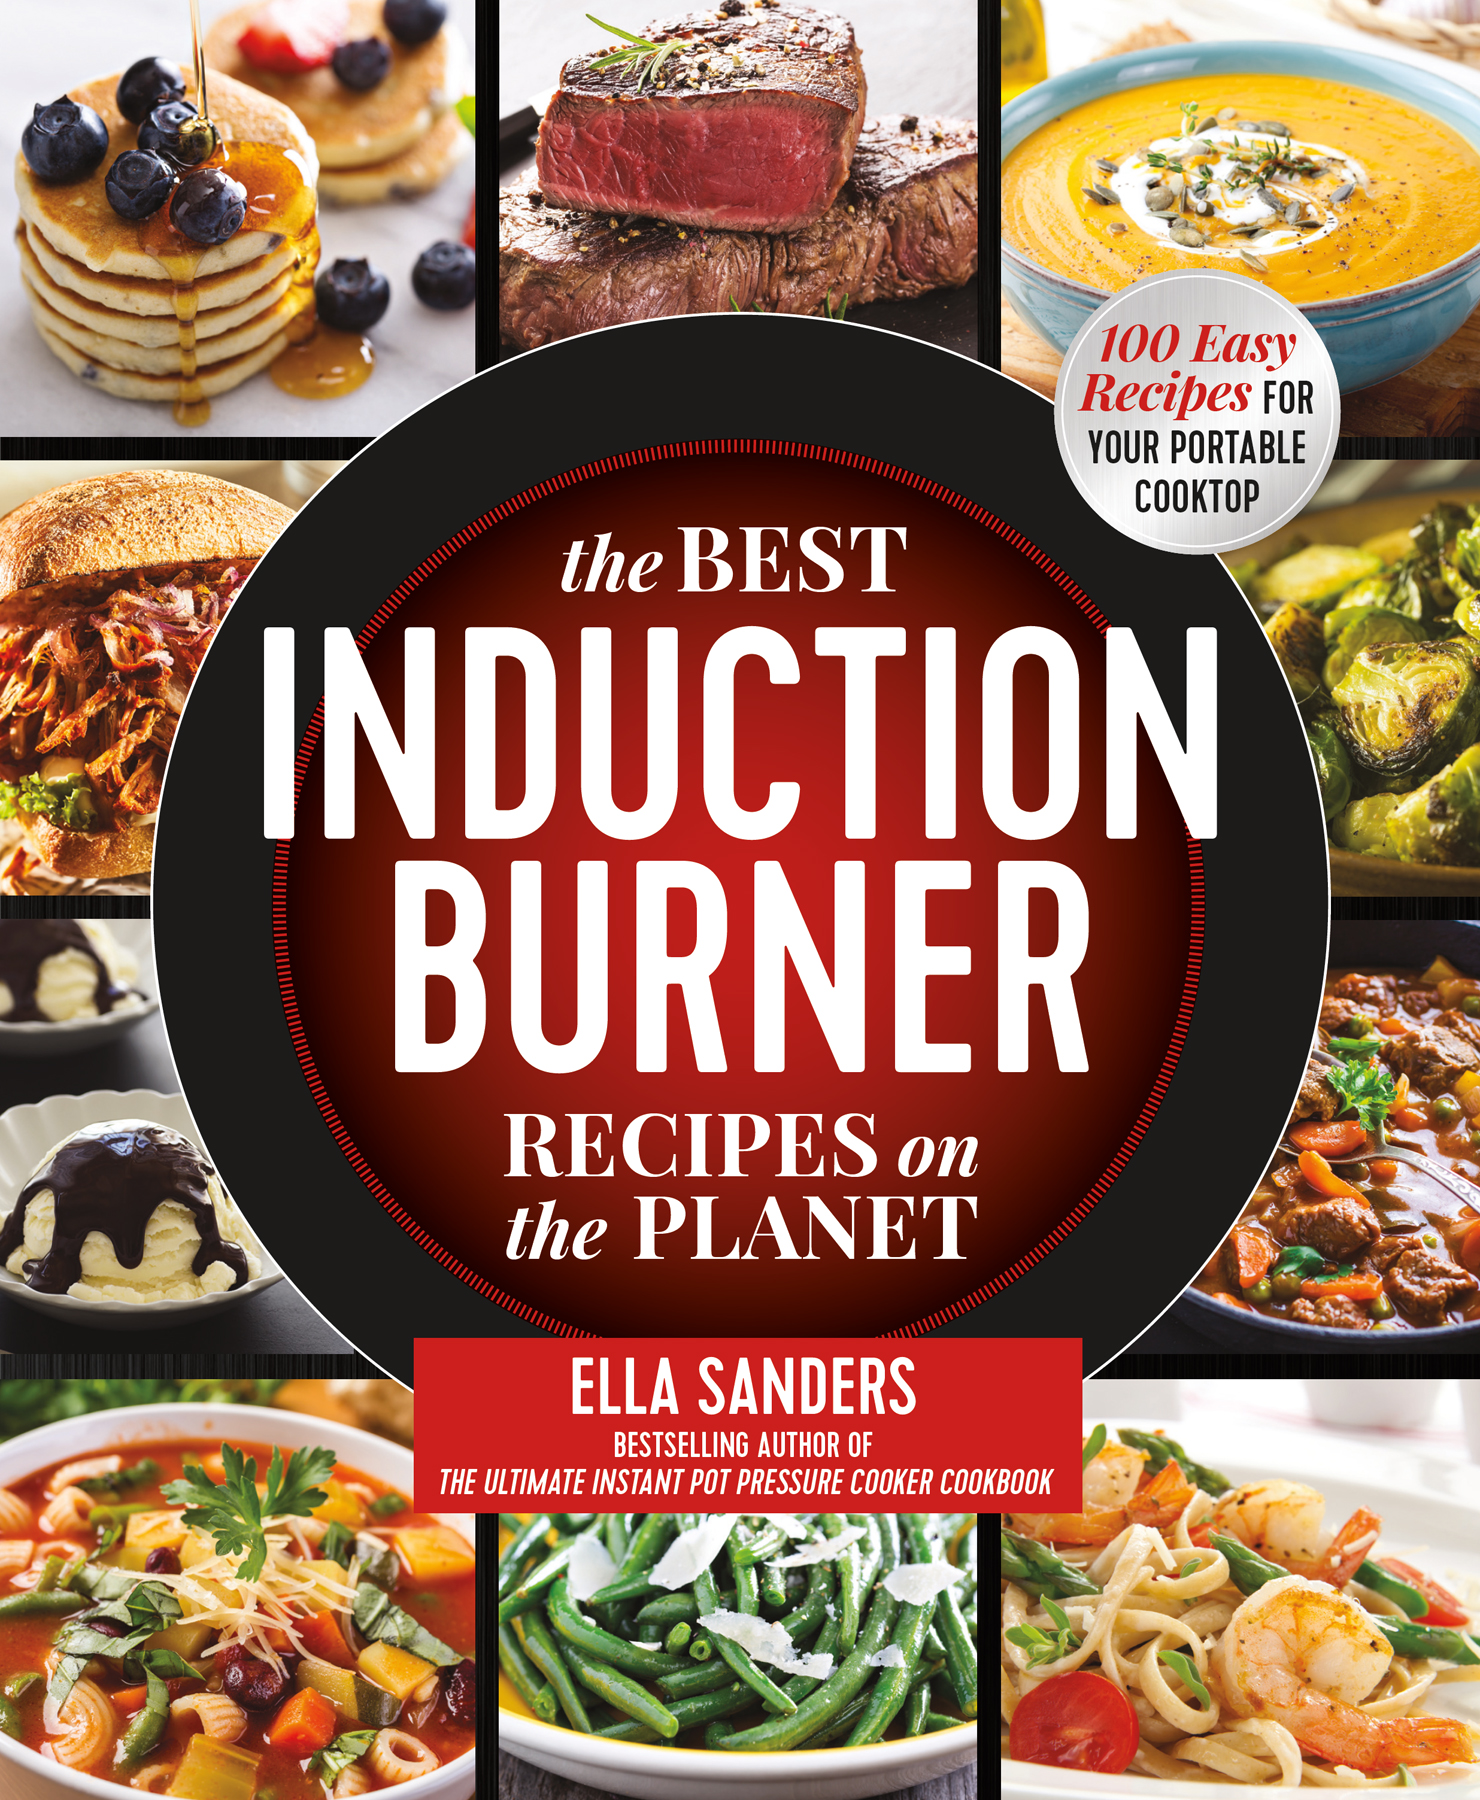 the BEST INDUCTION BURNER RECIPES on the PLANET ELLA SANDERS The author - photo 1